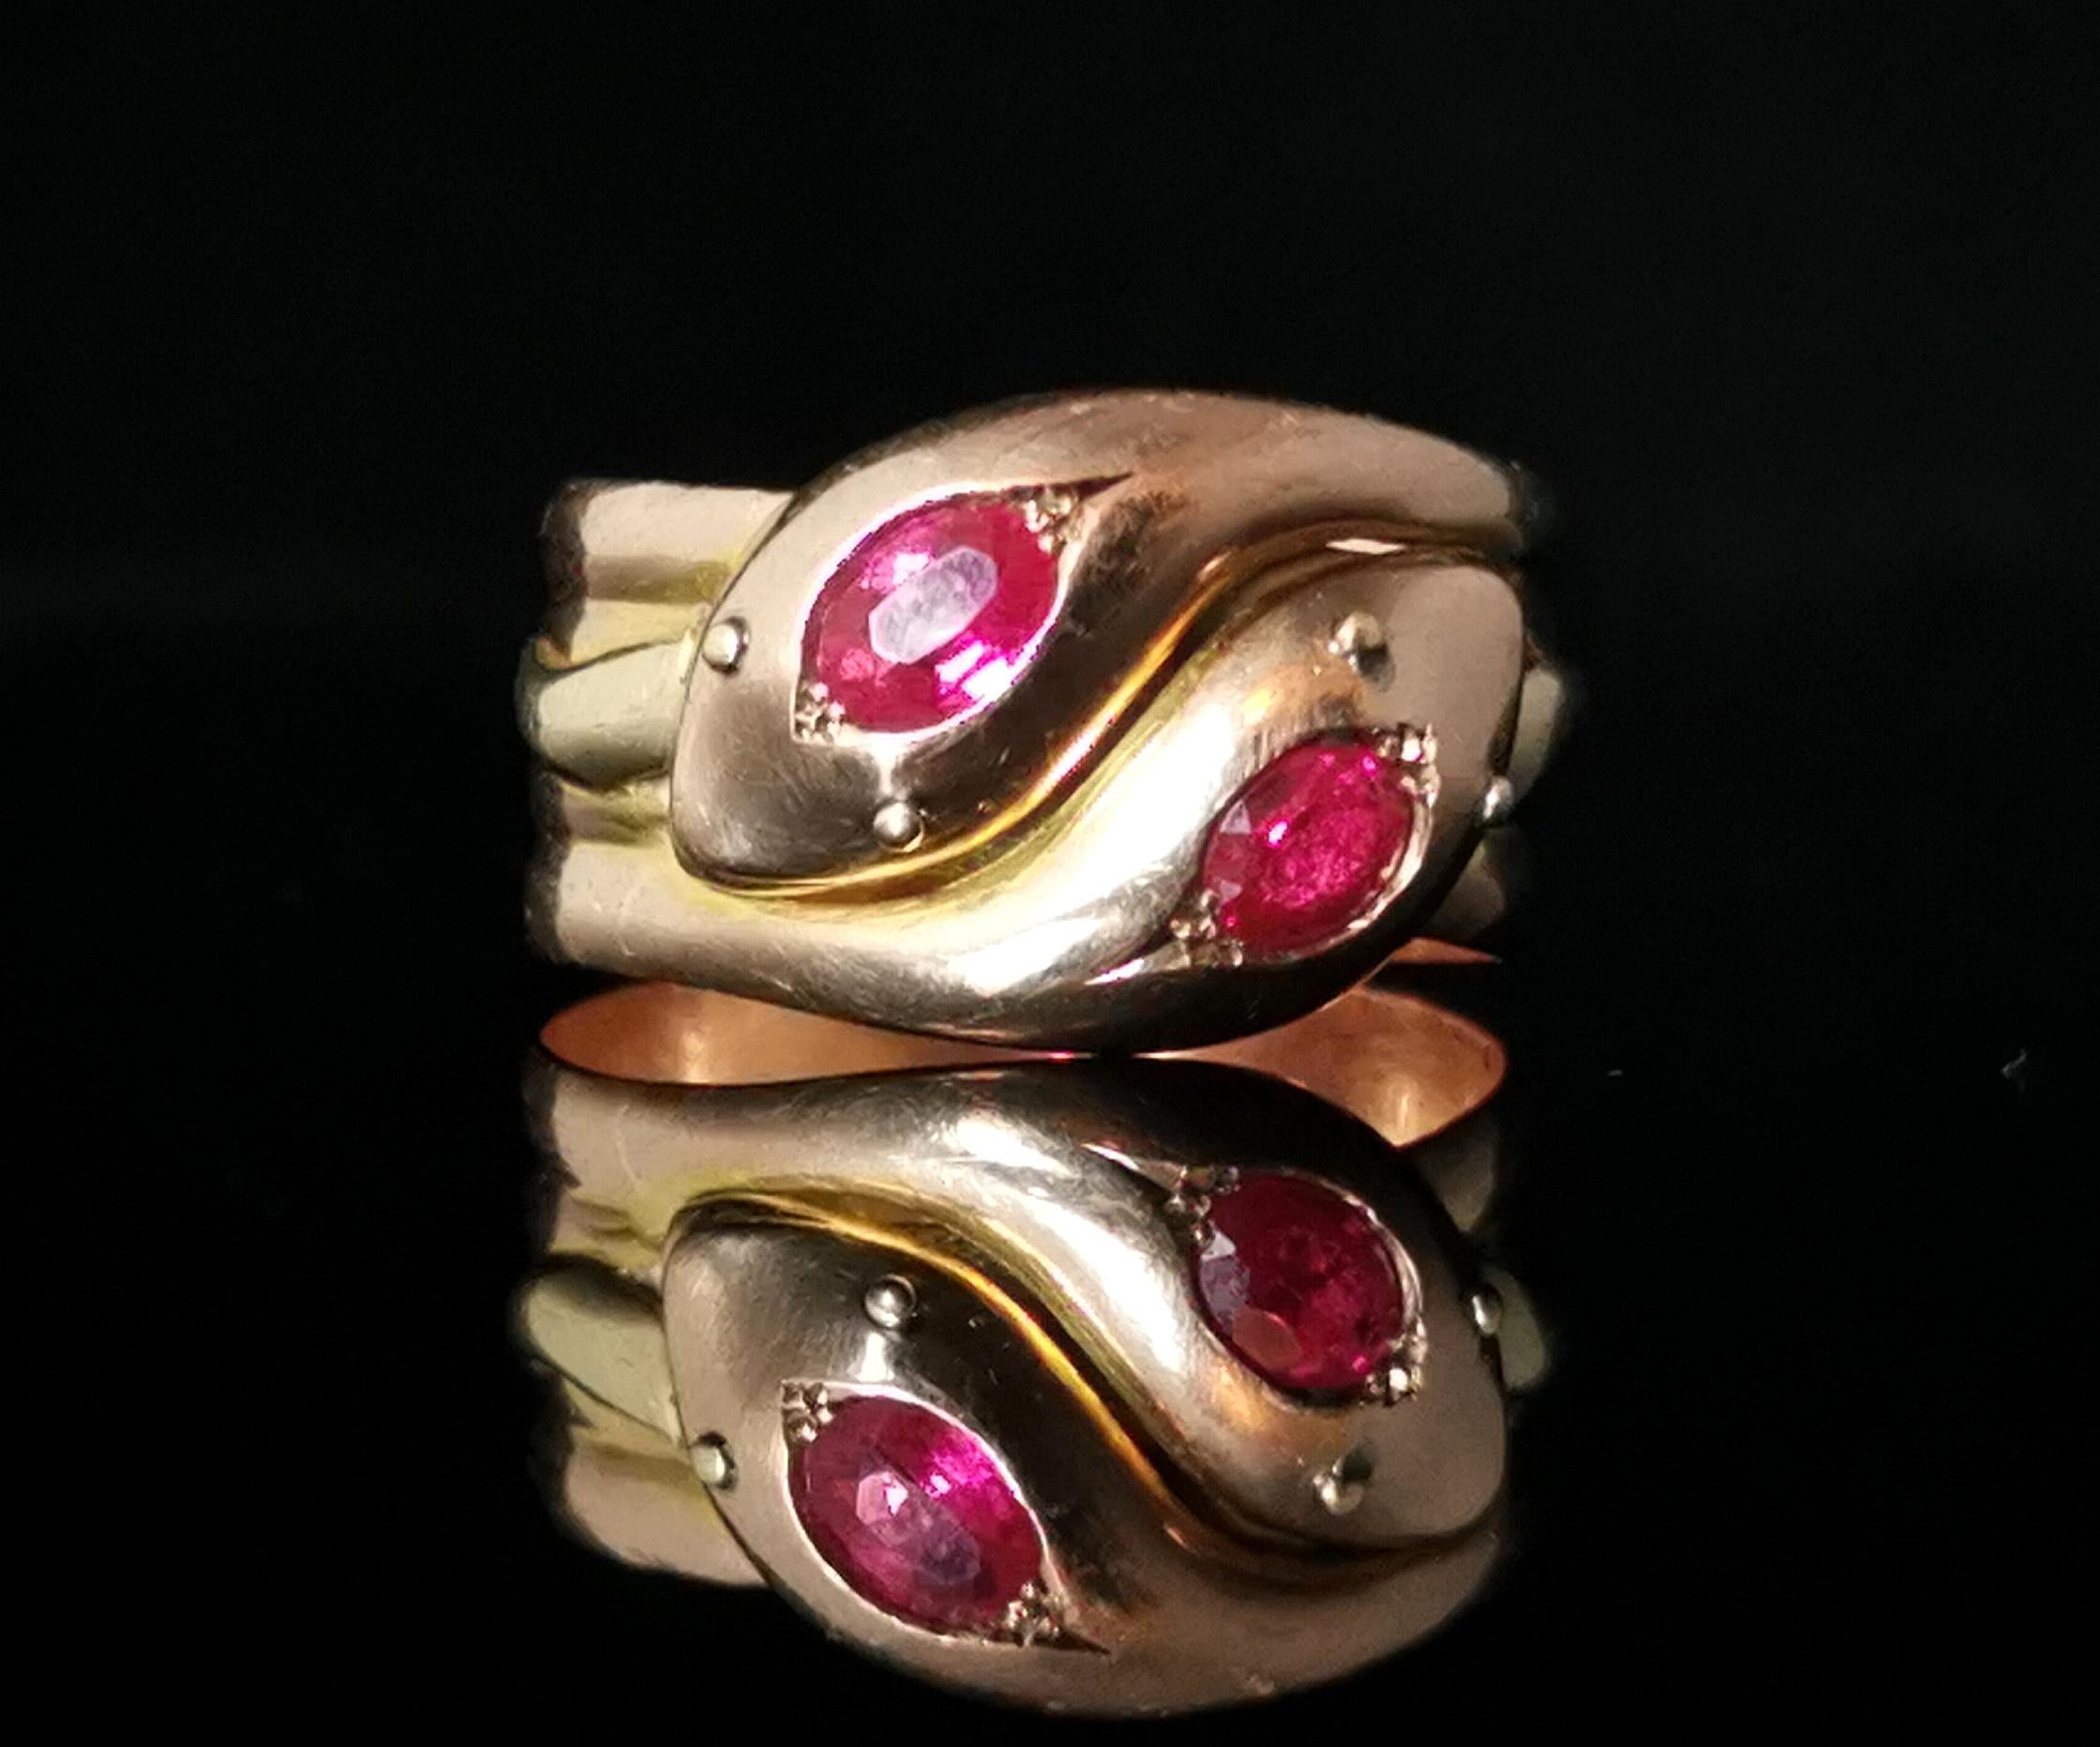 An impeccable antique, Mid Victorian Ruby snake ring.

Coils and coils of rich buttery 9 karat, antique yellow gold forming the entwined bodies of two snakes, the heads are both well detailed and both set with a gorgeous rich reddish Pink antique